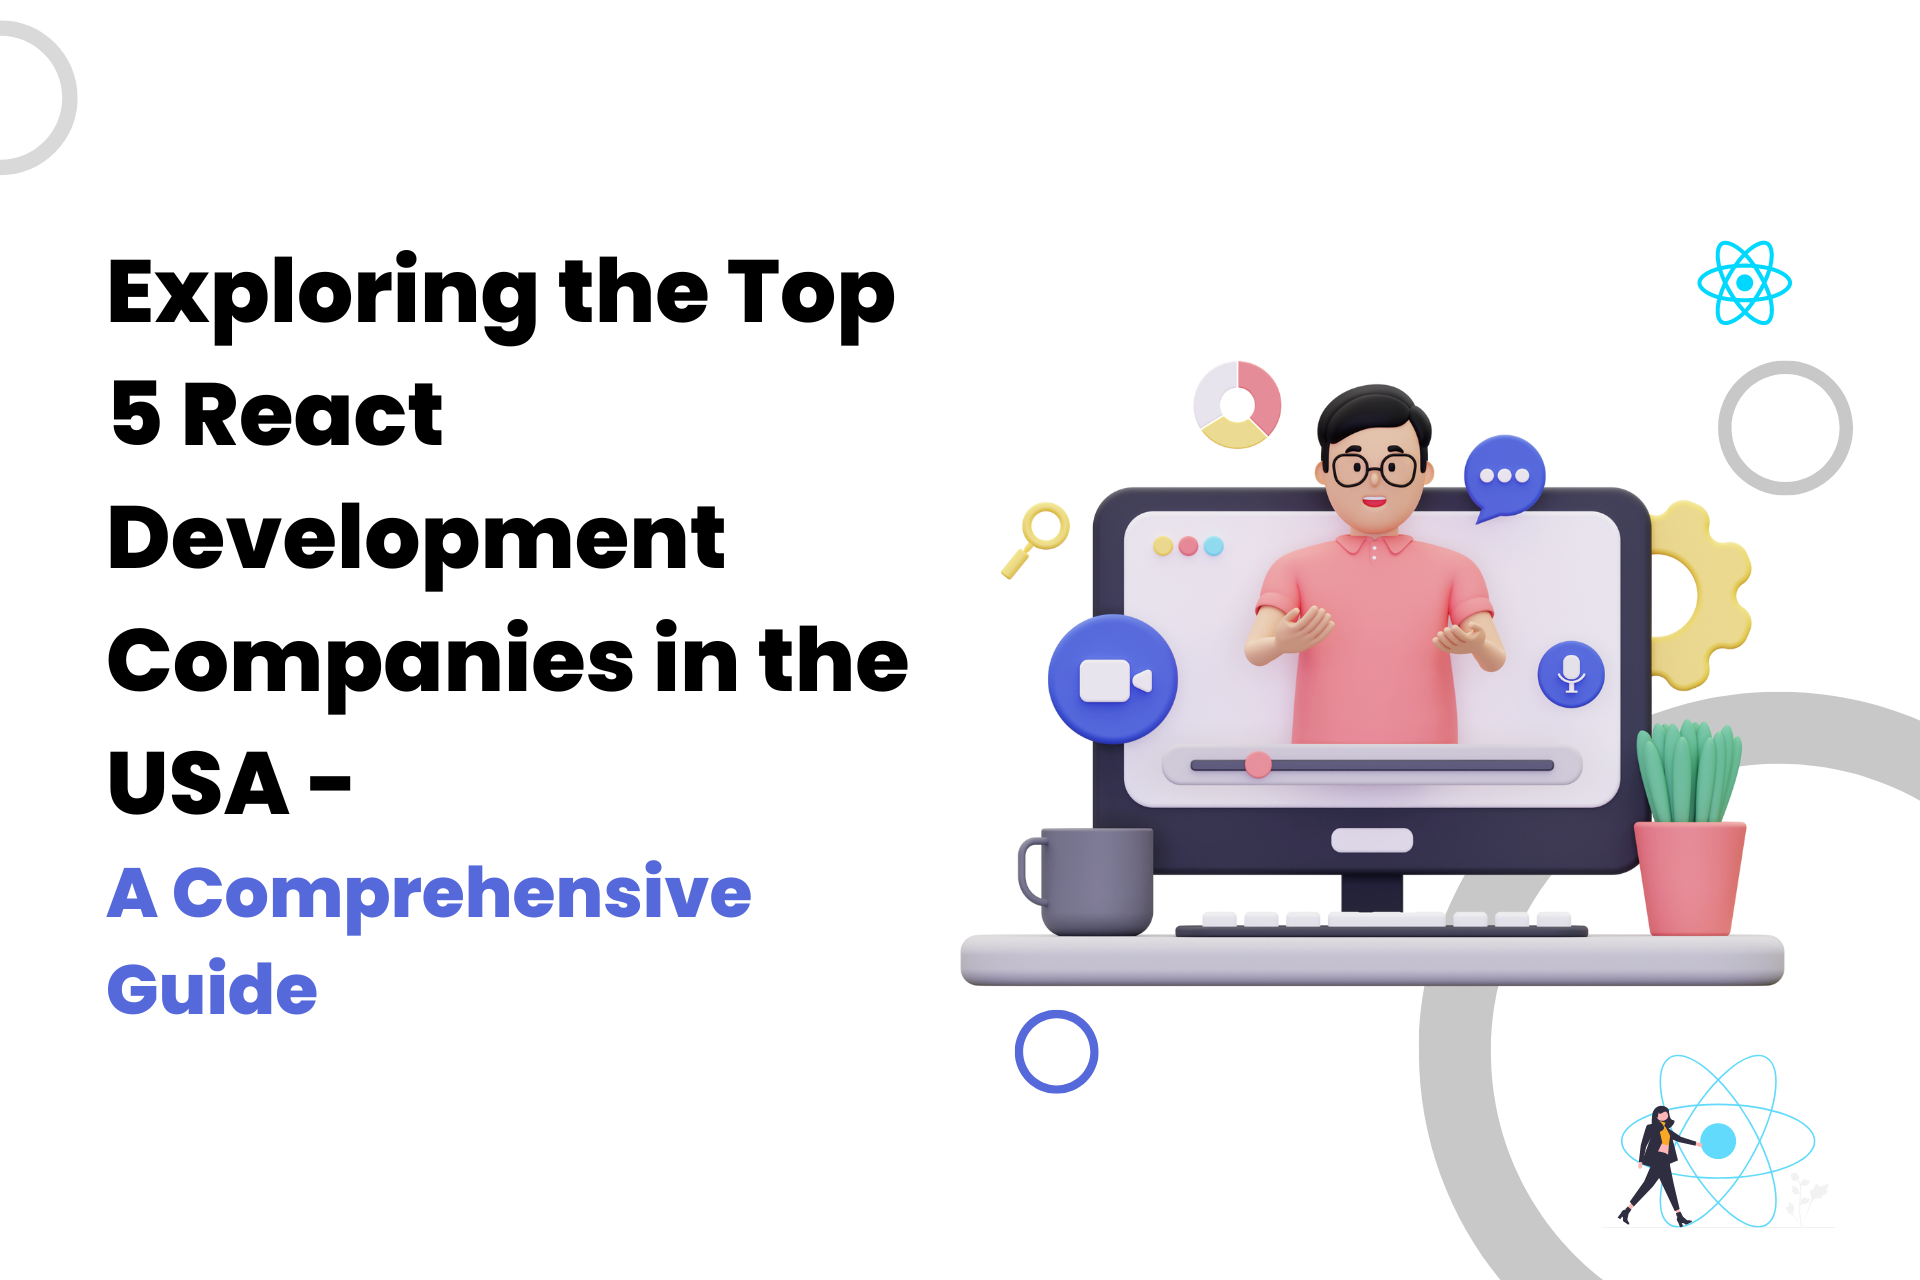 Exploring the Top 5 React Development Companies in the USA